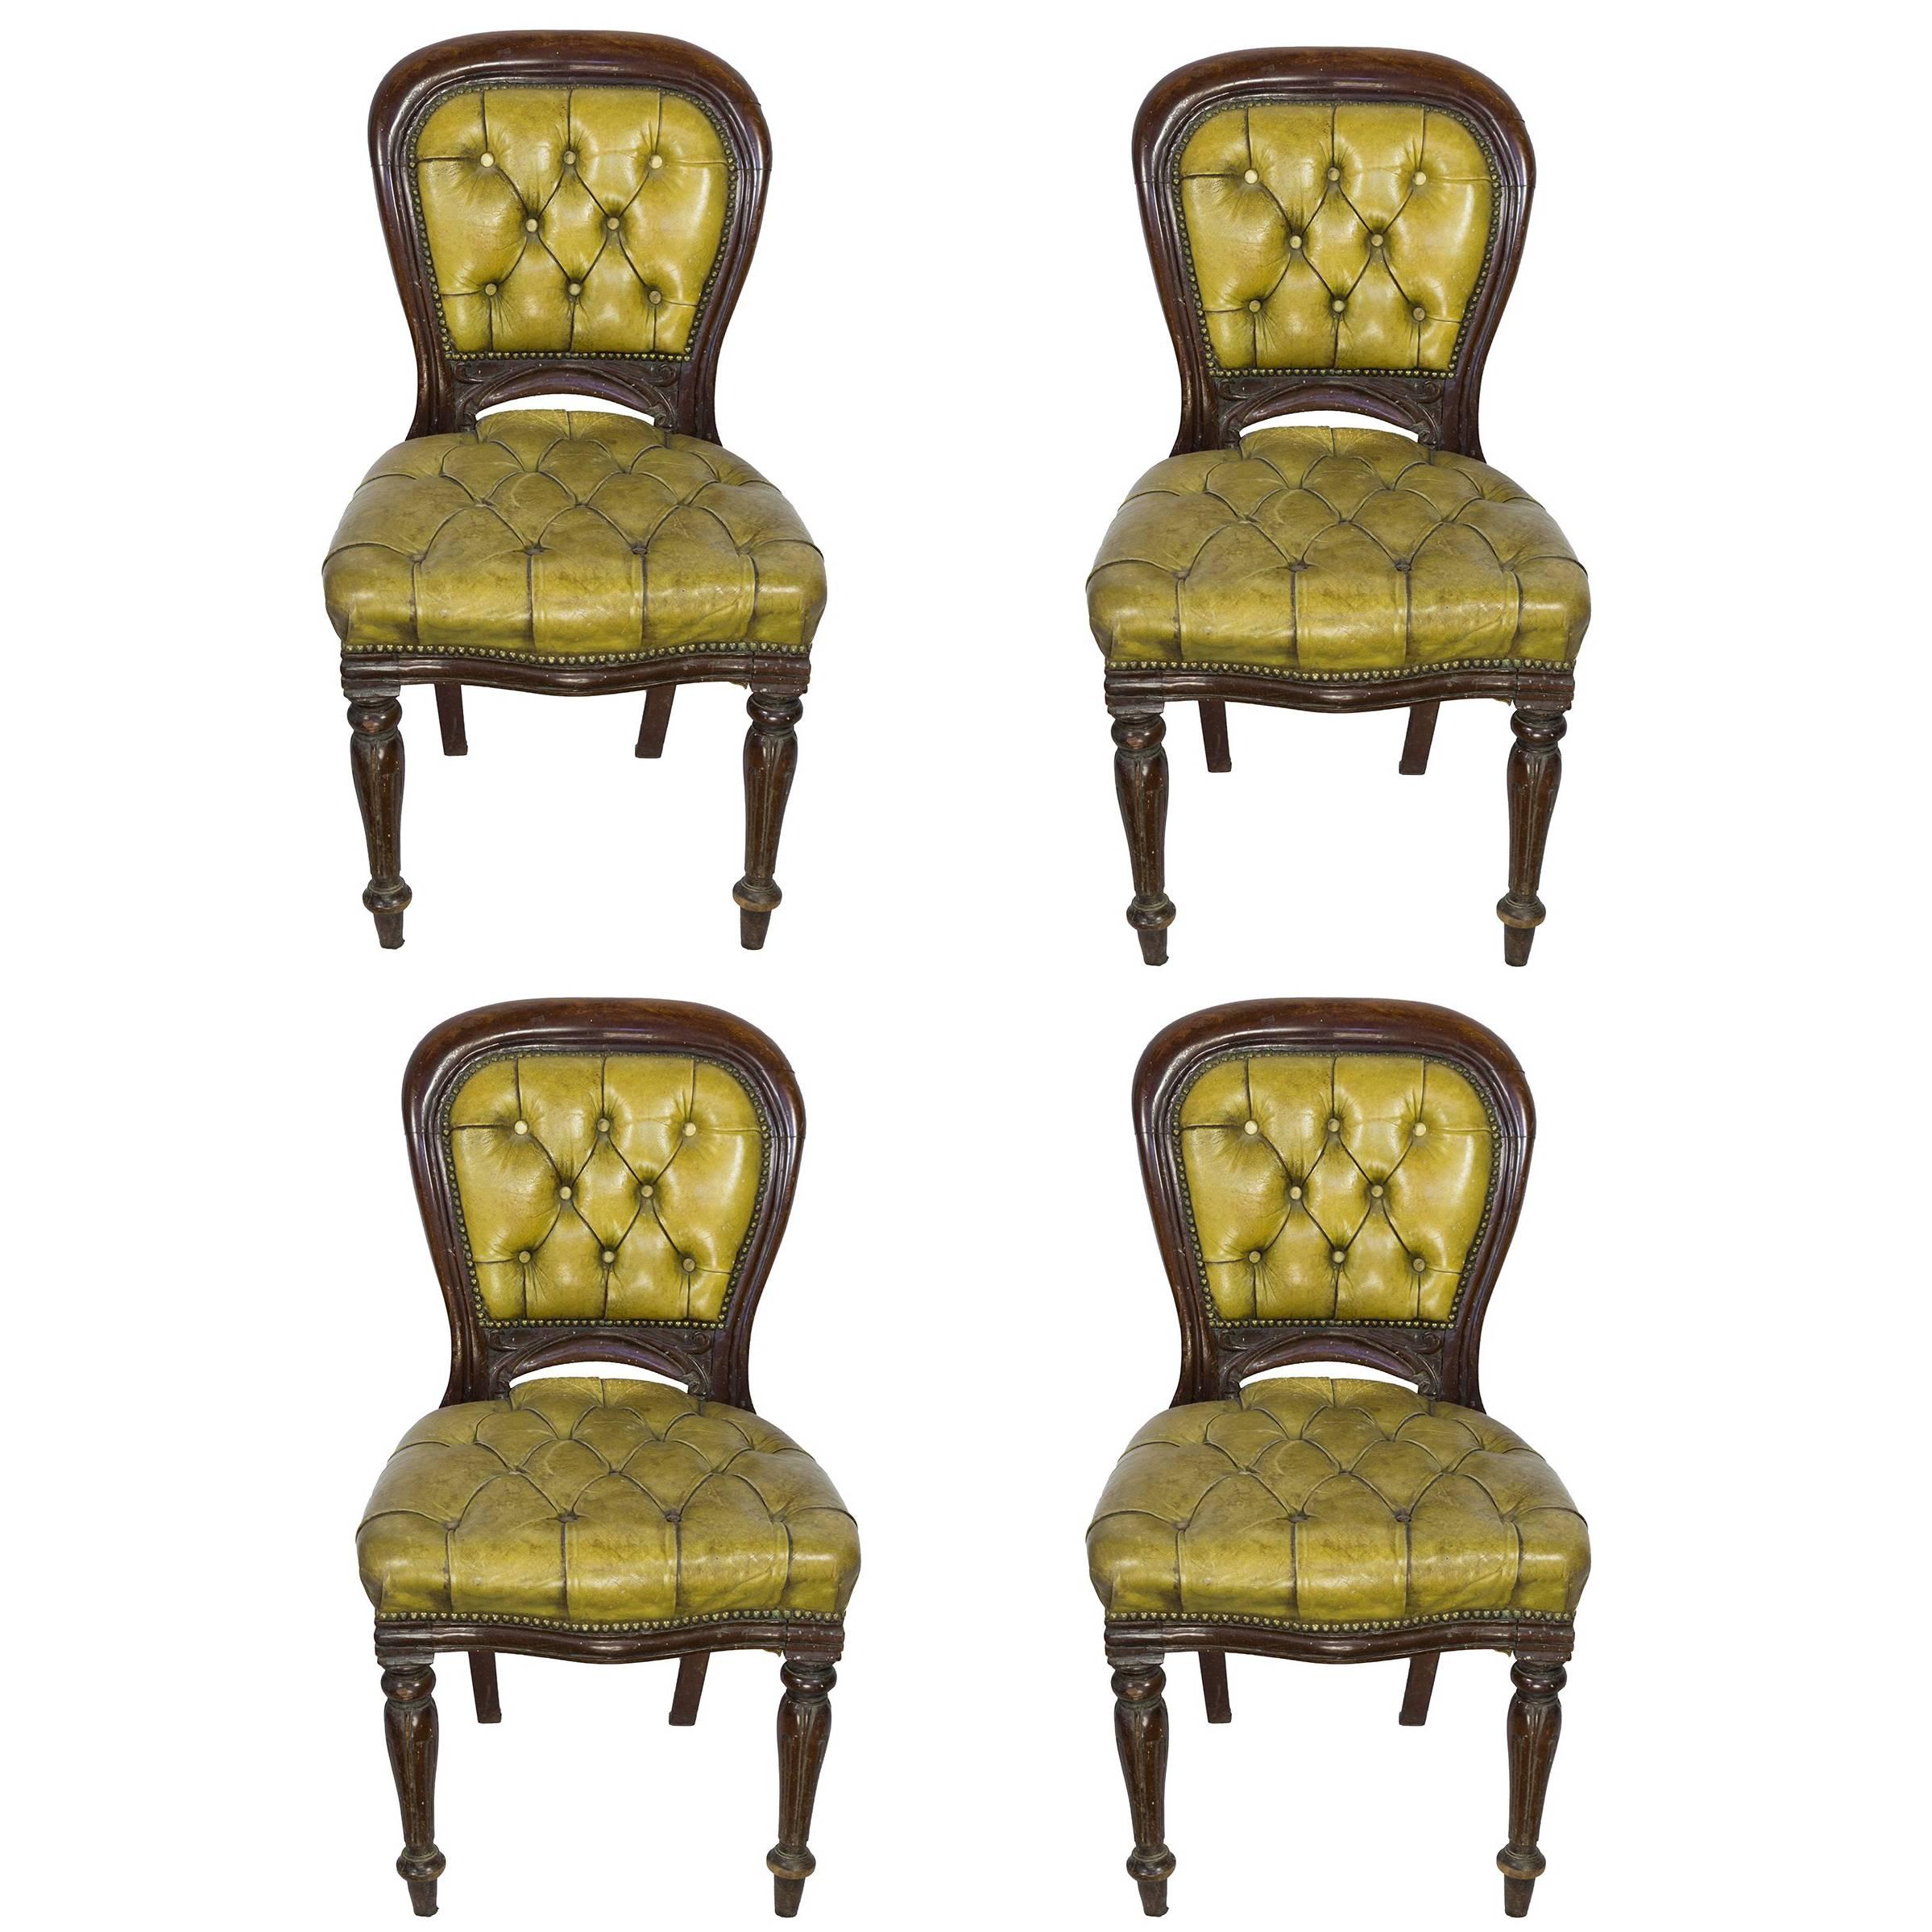 Set of Four 19th Century William IV Tufted Leather Side Chairs